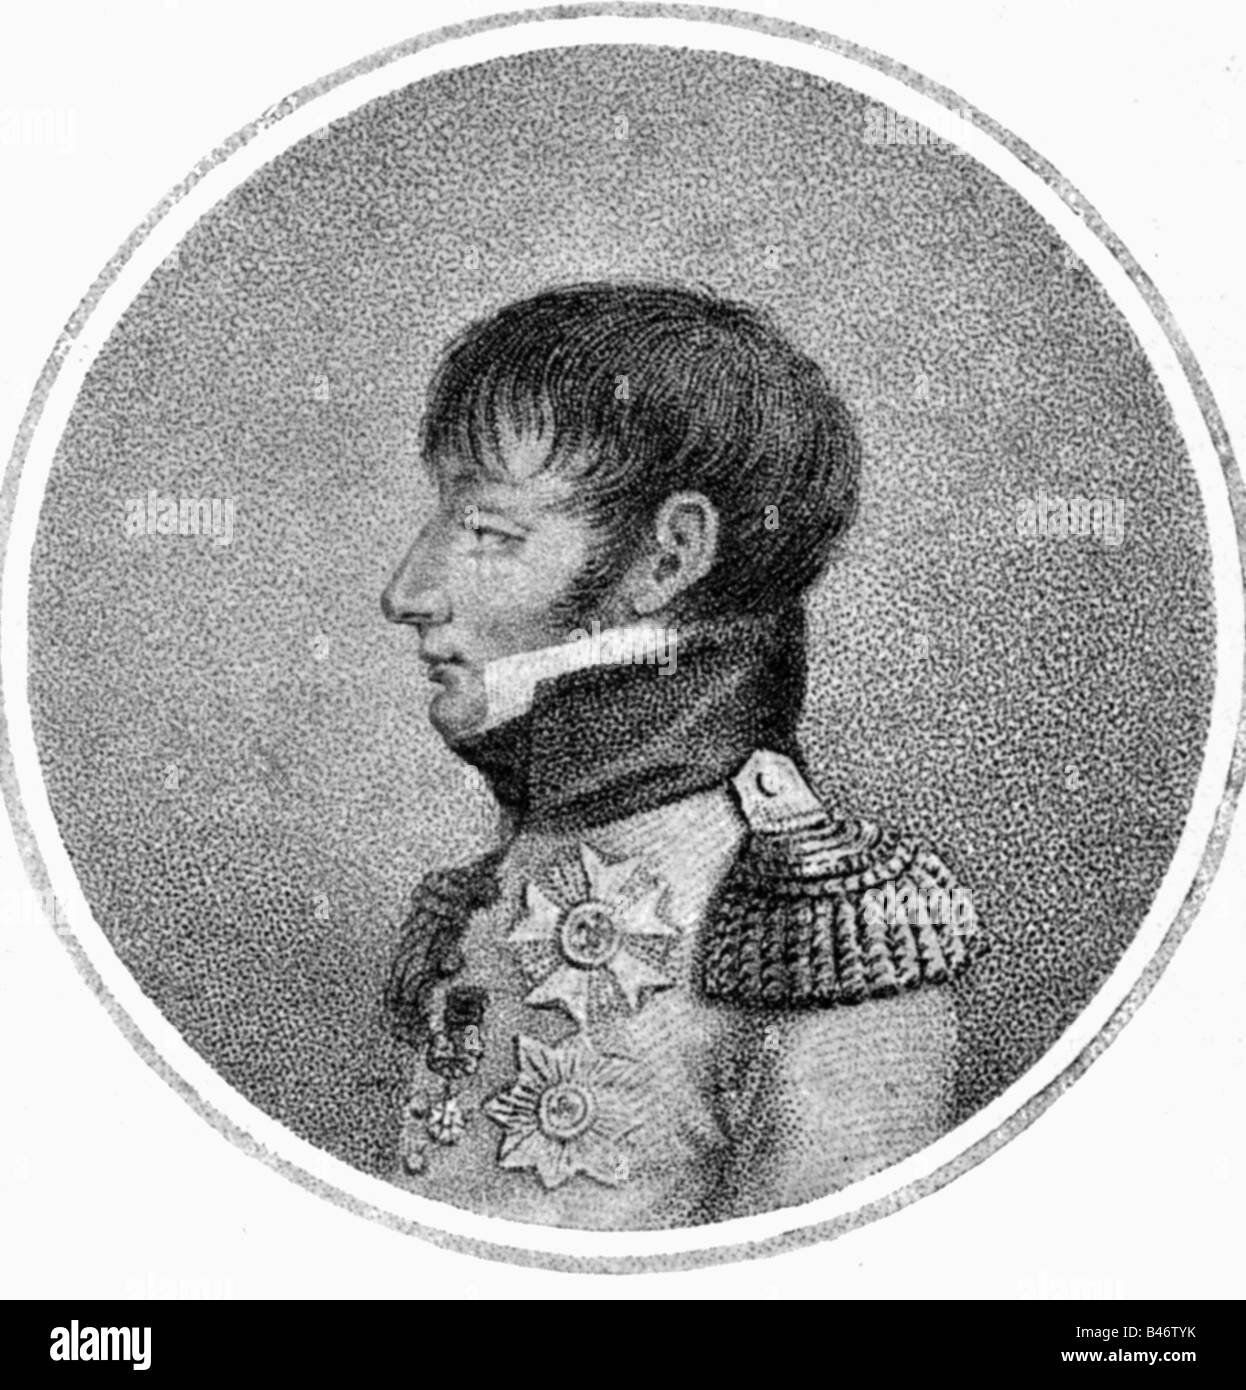 Bonaparte, Louis, 2.9.1778 - 25.6.1846, King of Holland 5.6.1806 - 30.6.1810, portrait, copper engraving by Portman after drawing by  Howen, circa 1808, , Artist's Copyright has not to be cleared Stock Photo